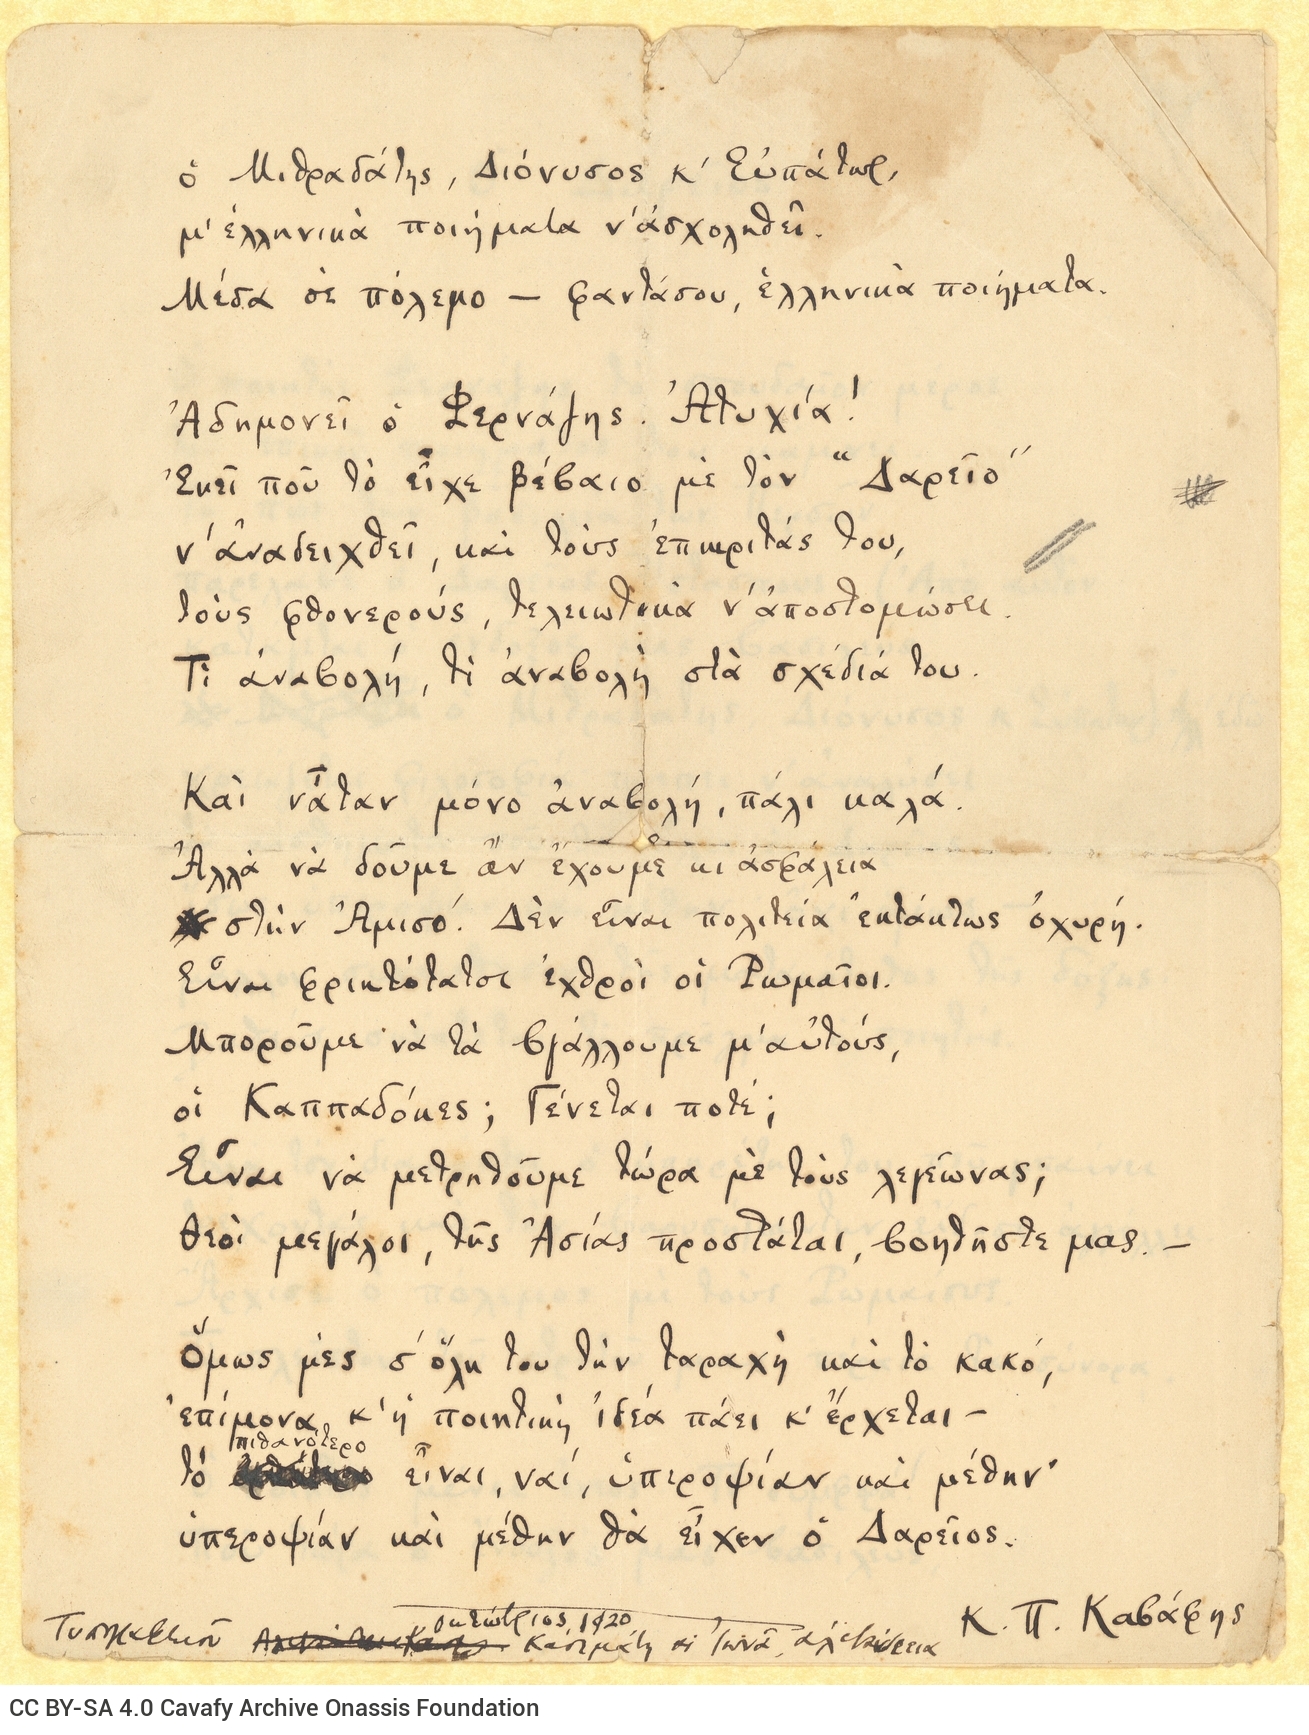 Autograph manuscript of the poem "Darius" on the first and third pages of a double sheet notepaper. Number "49" at top rig